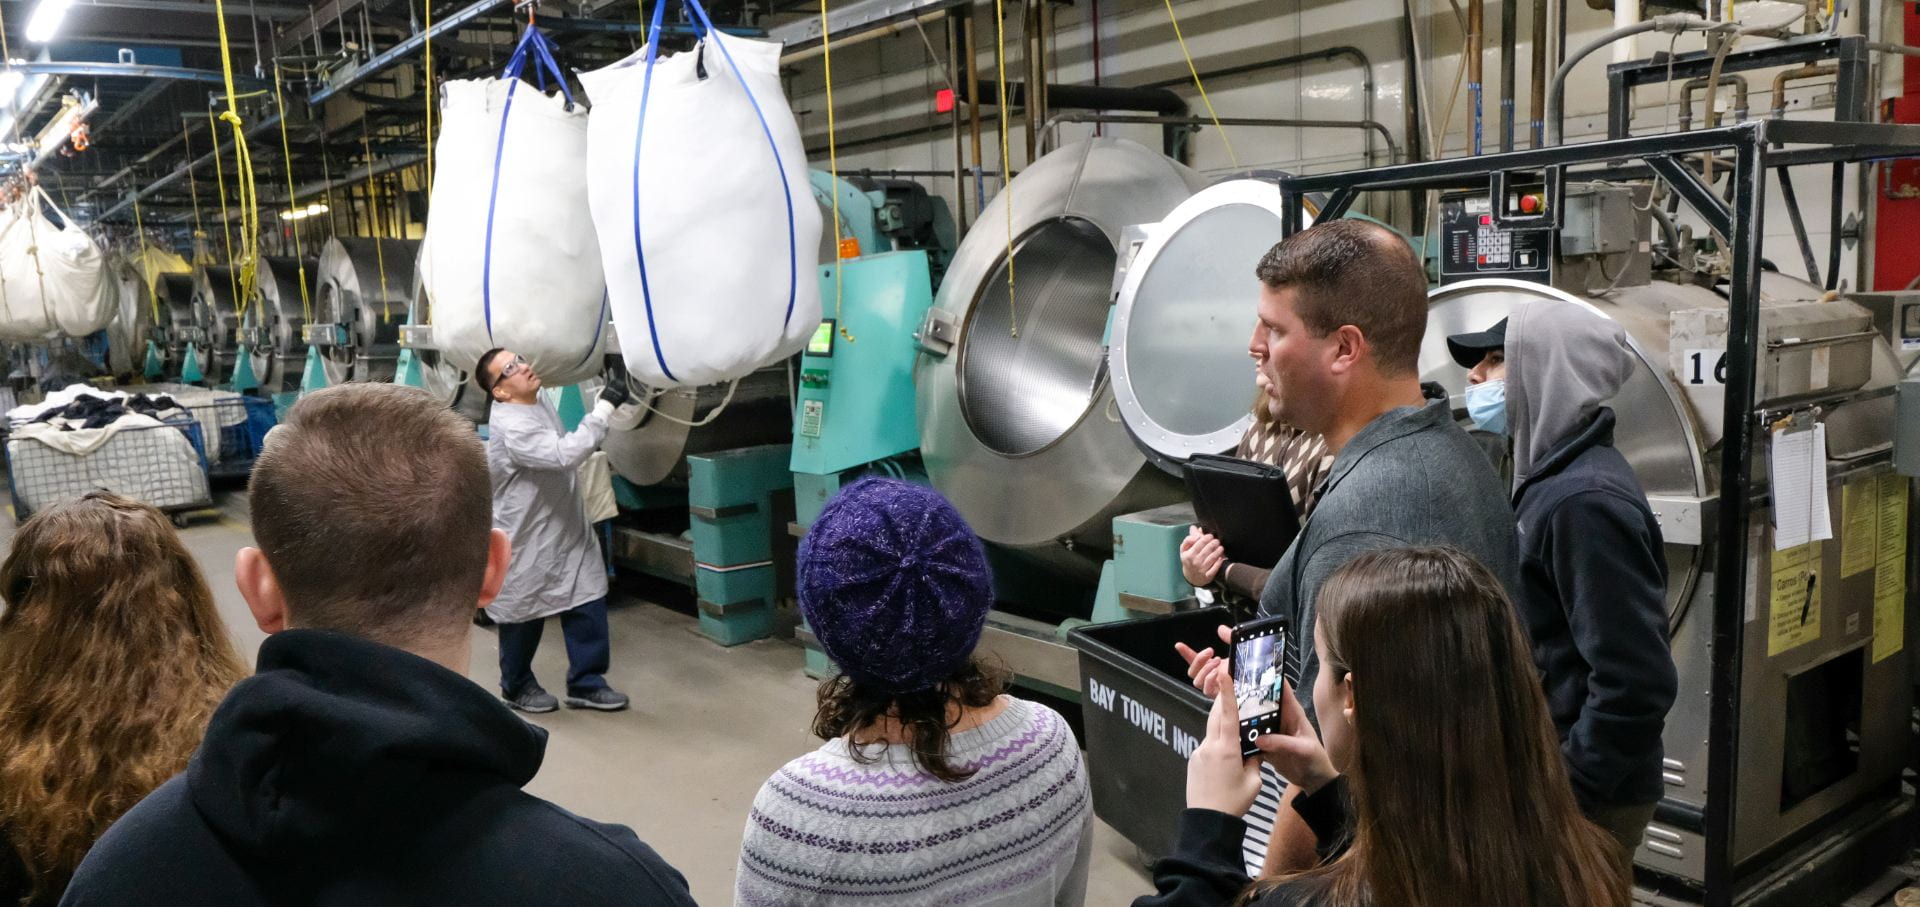 In the foreground, Shane Suda, Vice President of Plant Operations at Bay Towel in Green Bay, explains how commercial laundry is washed to UW-Green Bay business students as an employee moves a large laundry bag using a crane to position the laundry over an extremely large washing machine.